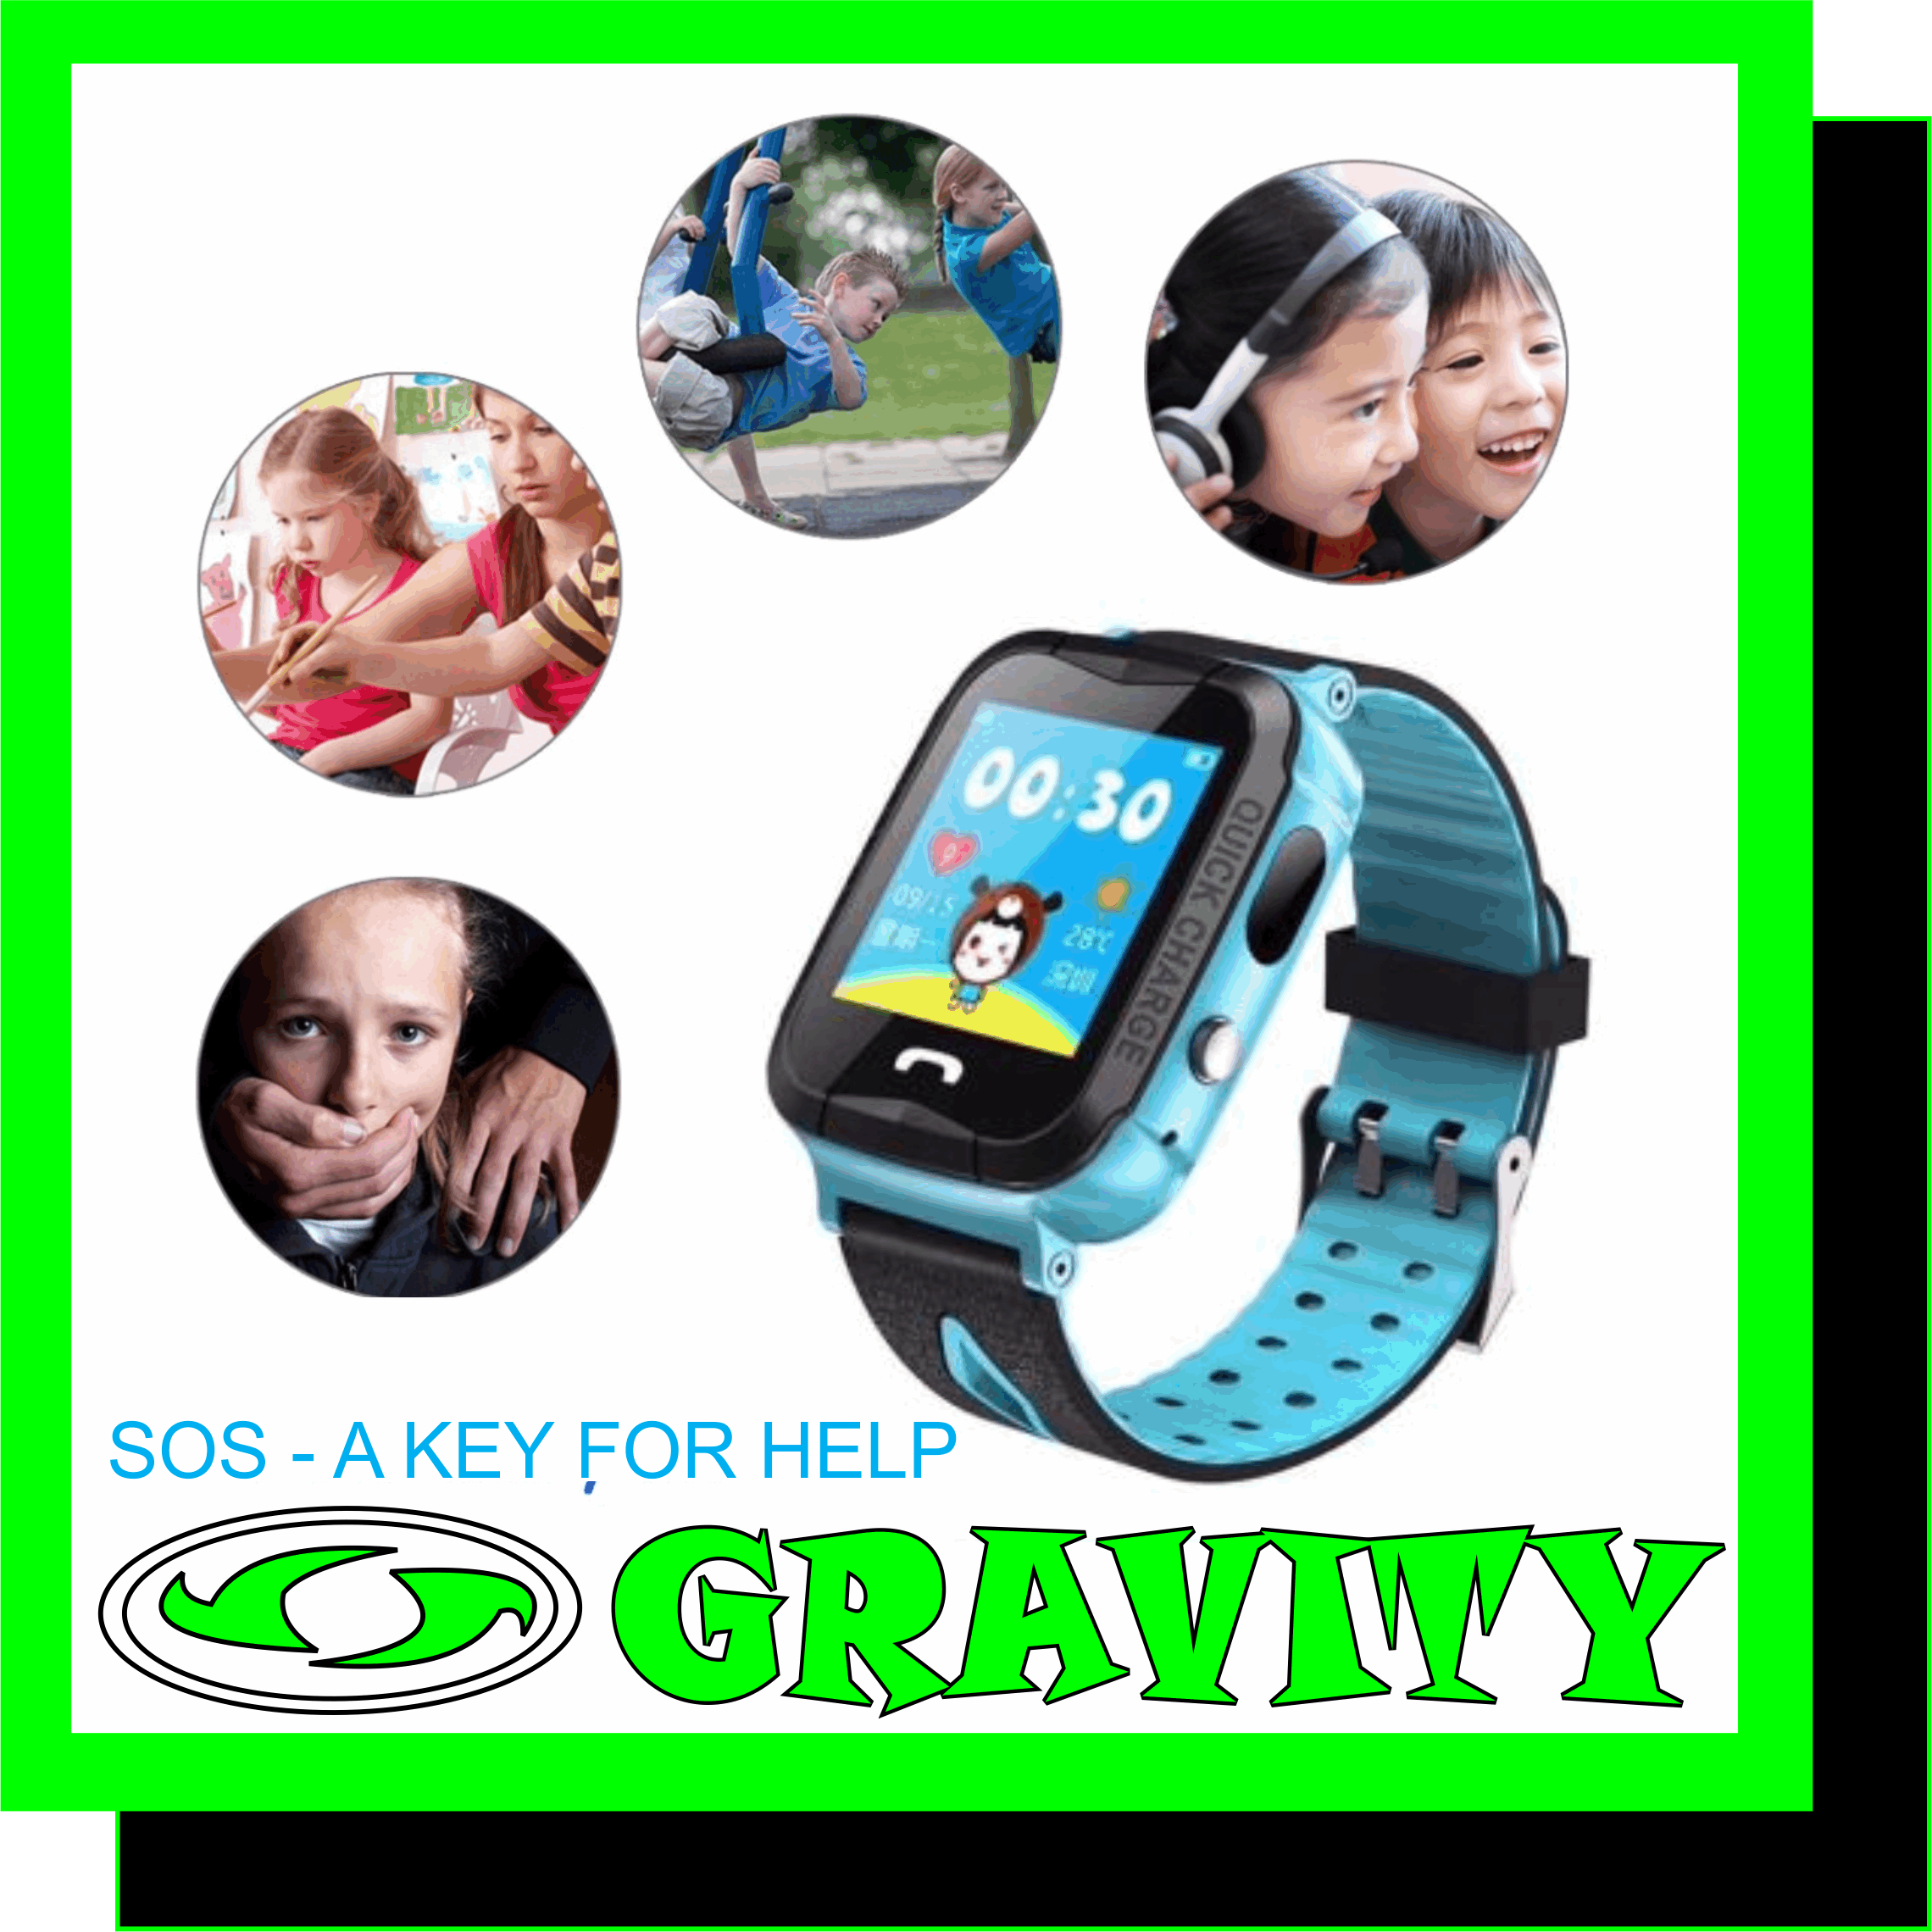 GPS SMART WATCH FOR CHILD BABY SUPPORT SIM CARD SOS CALL CAMERA FLASHLIGHT WRIST WATCH FOR BOY AND GIRL  Call & Chat Communication: Insert a 2G Micro SIM card to communicate with your child by sending calls or voice messages.  Please buy extra GSM network SIM Card  Safety Protection: Kids can press the SOS key for 3 seconds to circularly call families' numbers for help. This function is really helpful for emergency situations.  LBS+AGPS Location: Built-in double Mode Global Positioning System, so you can keep track your kids'location at anytime. When Kids are indoor or at poor gps signal place, the watch will work on LBS mode, and provide an approximately position, the error will be caused by local signal place, error will be 0.3 ~ 4 miles.  Fun Camera: Your kids can enjoy take selfies and picture. And the flashlight can be used anytime if necessary.  Other Features: Calling, Phone Book, Quick Learning, Chat, Camera, Album, SOS Emergency Call, LBS+AGPS Positioning, Anti Lost, Remote Control, Remote Camera, Flashlight. Parents can control and set the smart watch through the APP "Setracker".